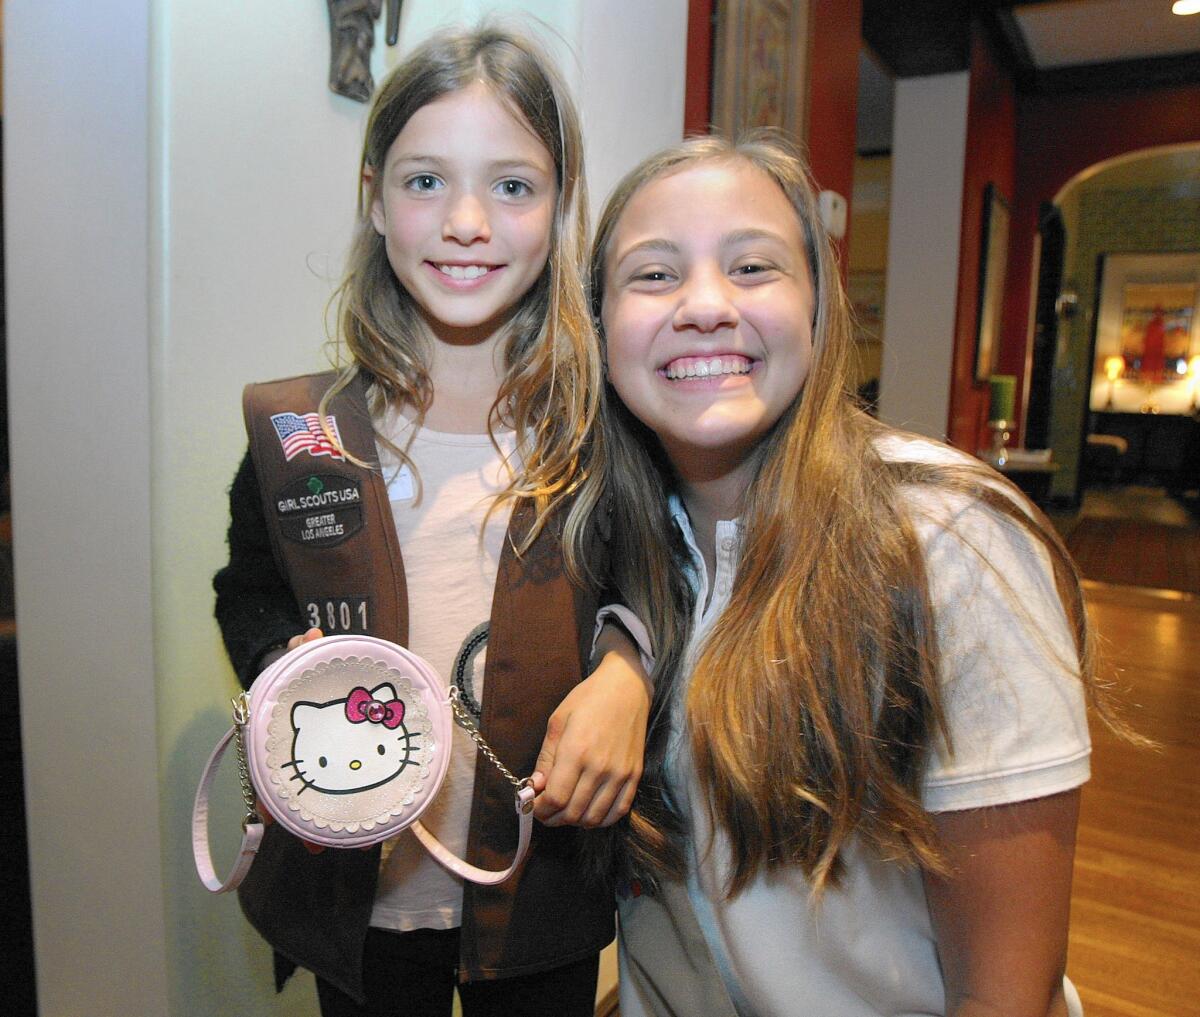 With her Hello Kitty purse in hand, Juliana Rozanski, 9, and Maddie Bohman, 14, both of Glendale, get together for a photo on Thursday.